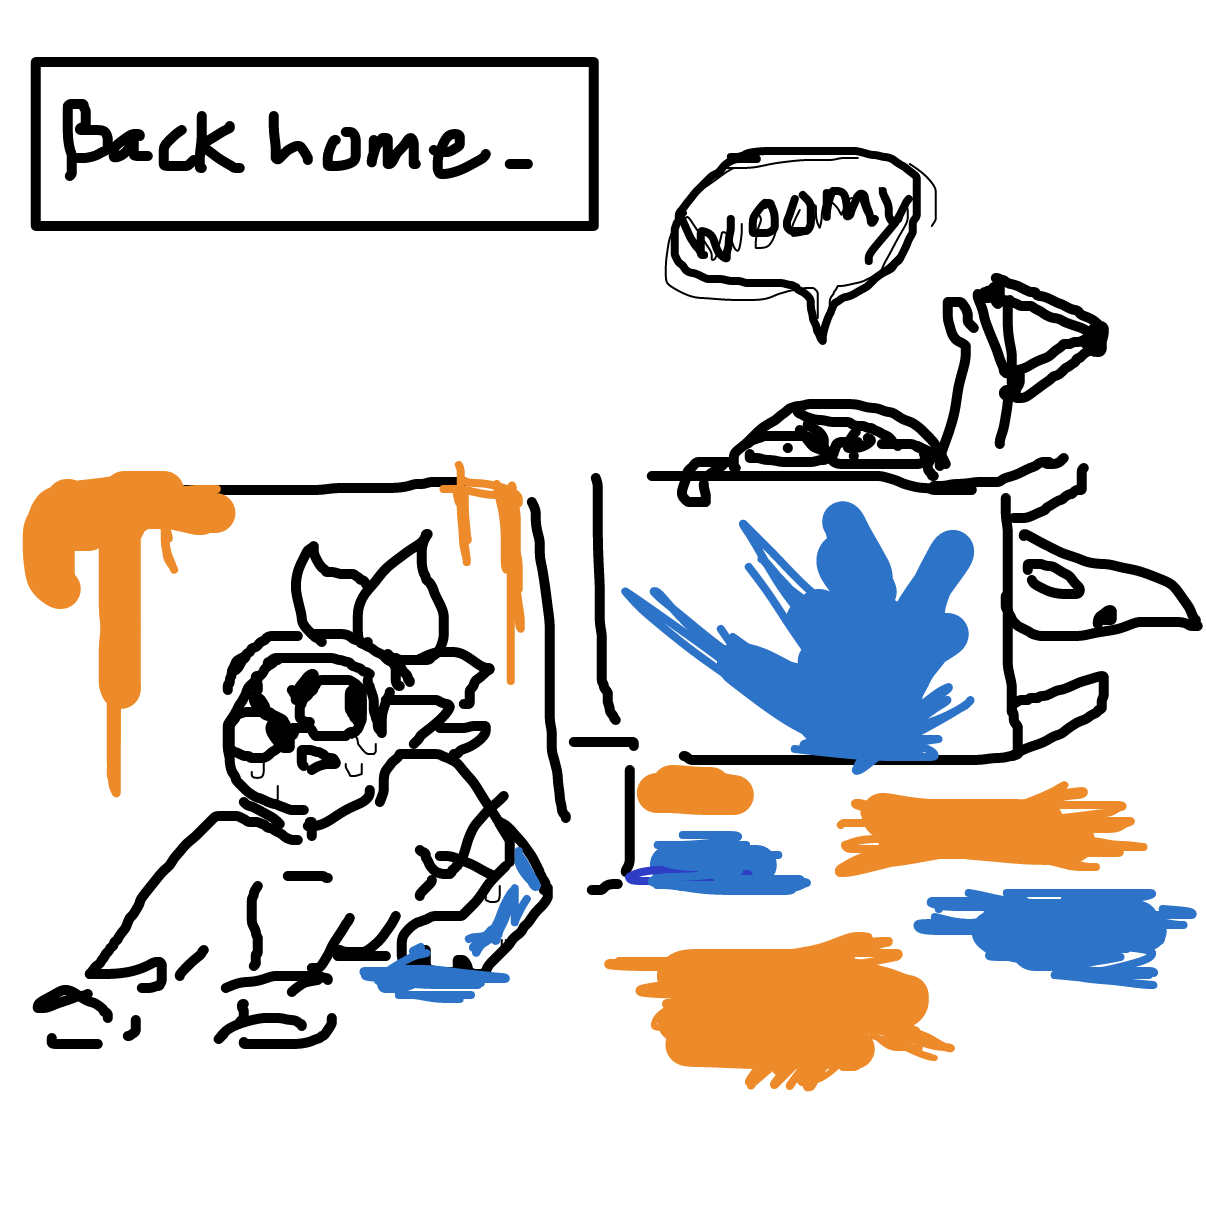  - Online Drawing Game Comic Strip Panel by Dragonblitzx